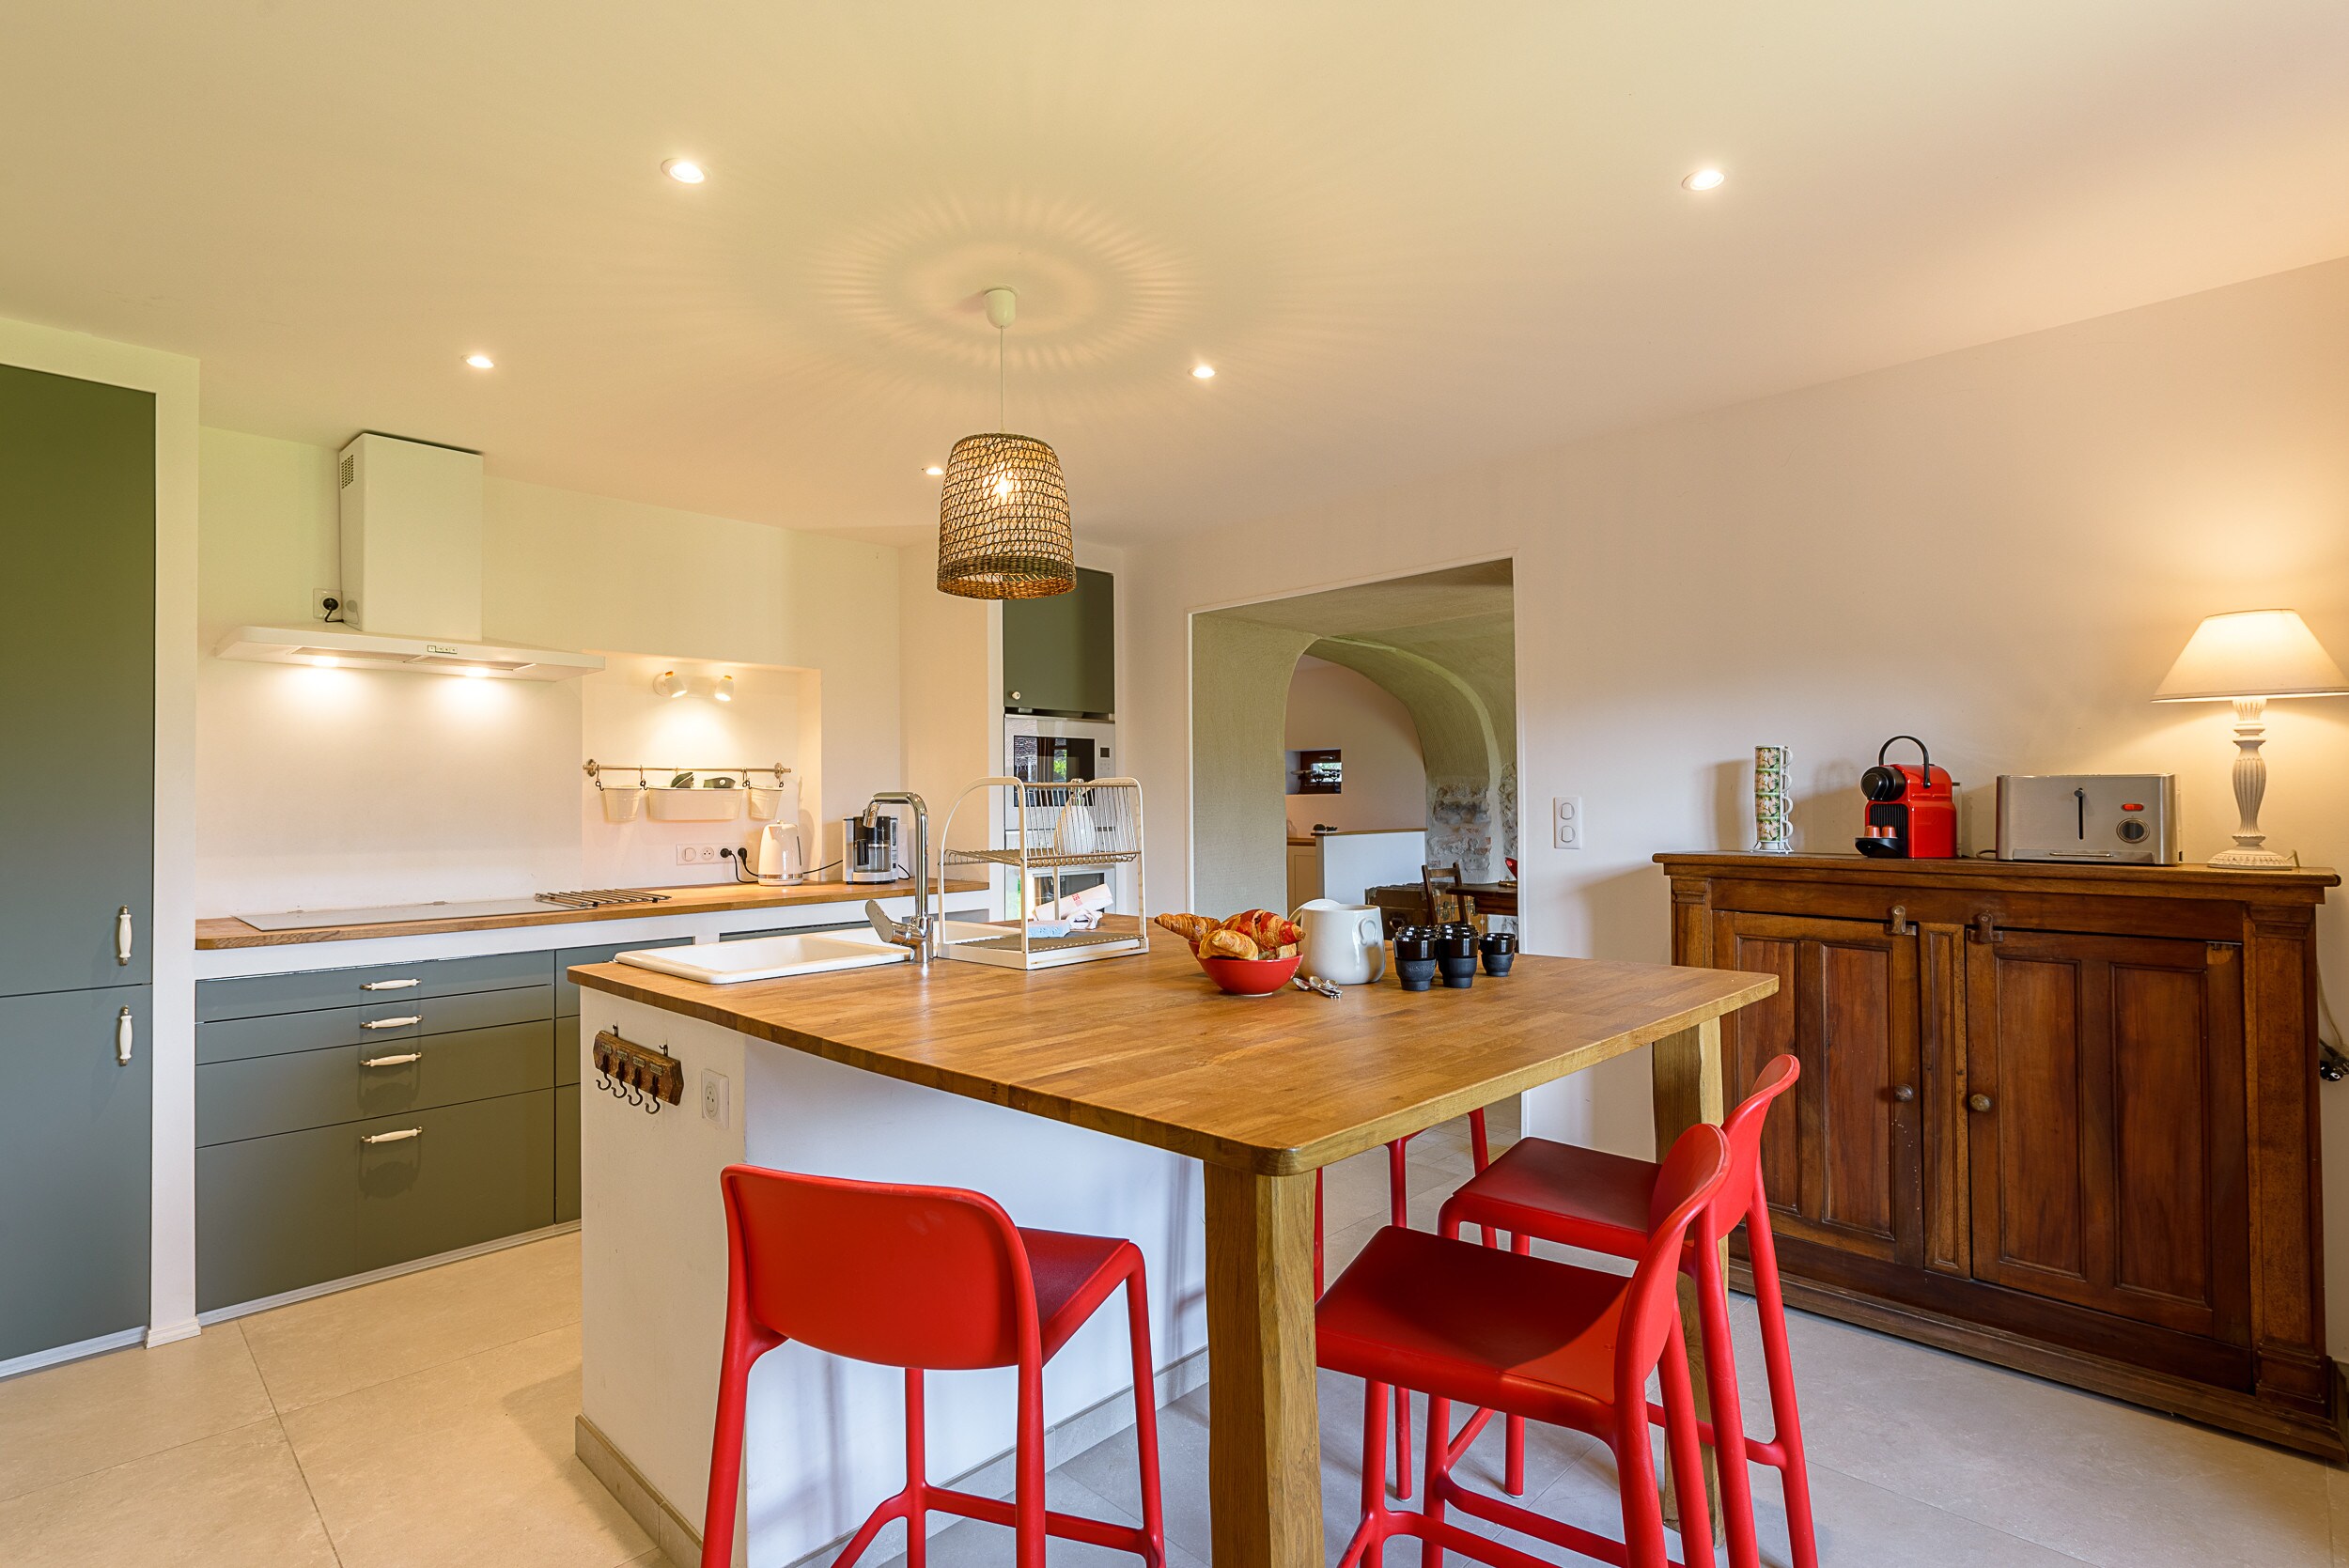 Independent kitchen, equipped with central island 